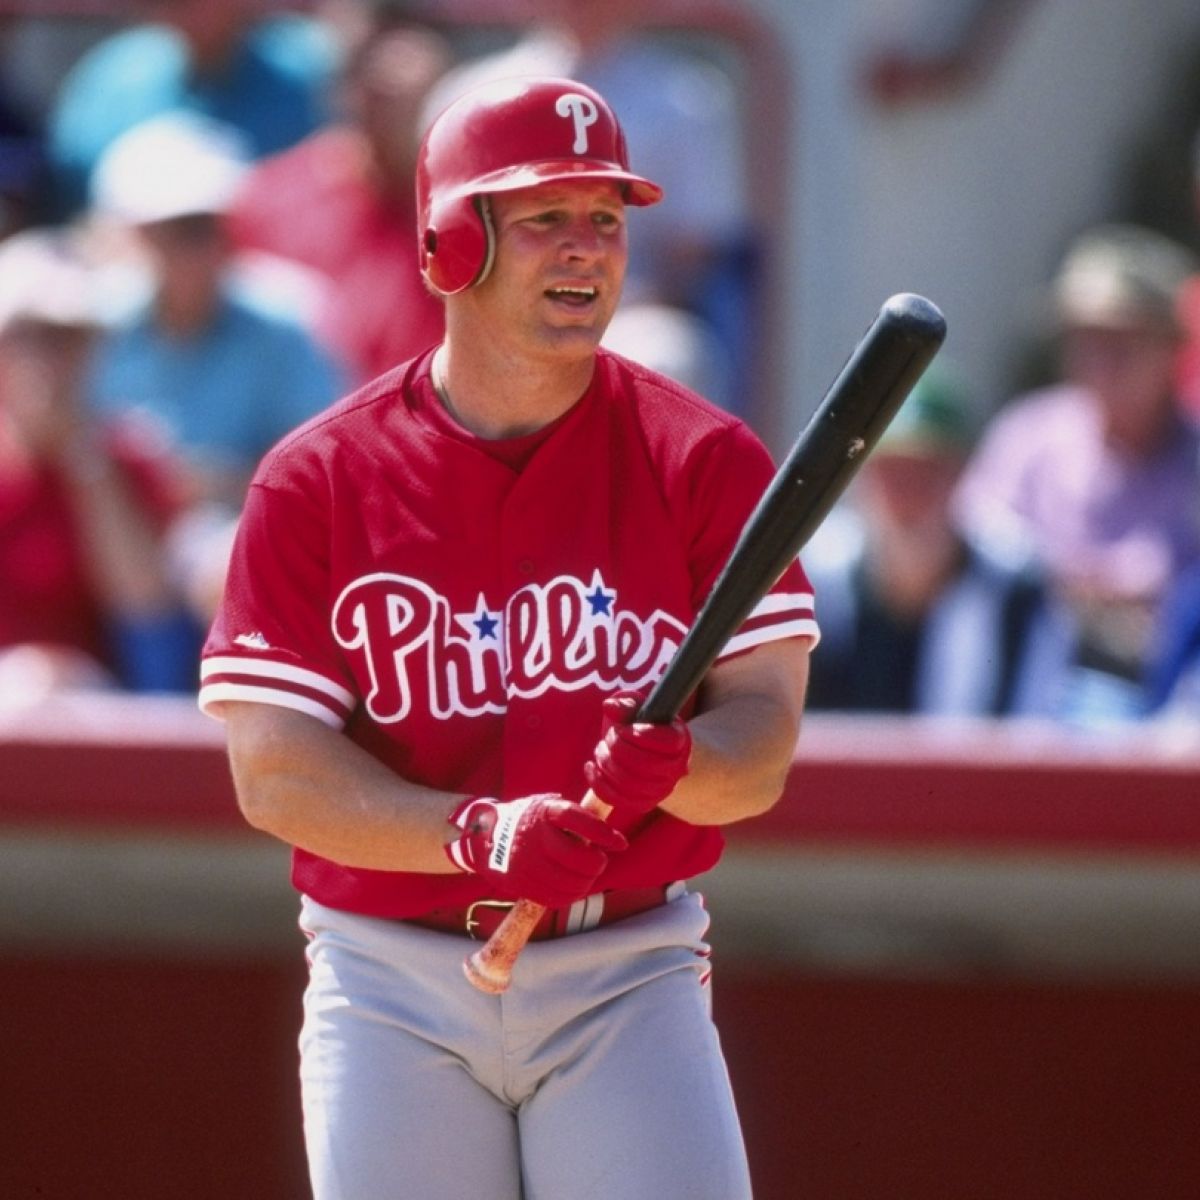 America at Large: Lenny Dykstra s tall tale fails to nail key issues. 